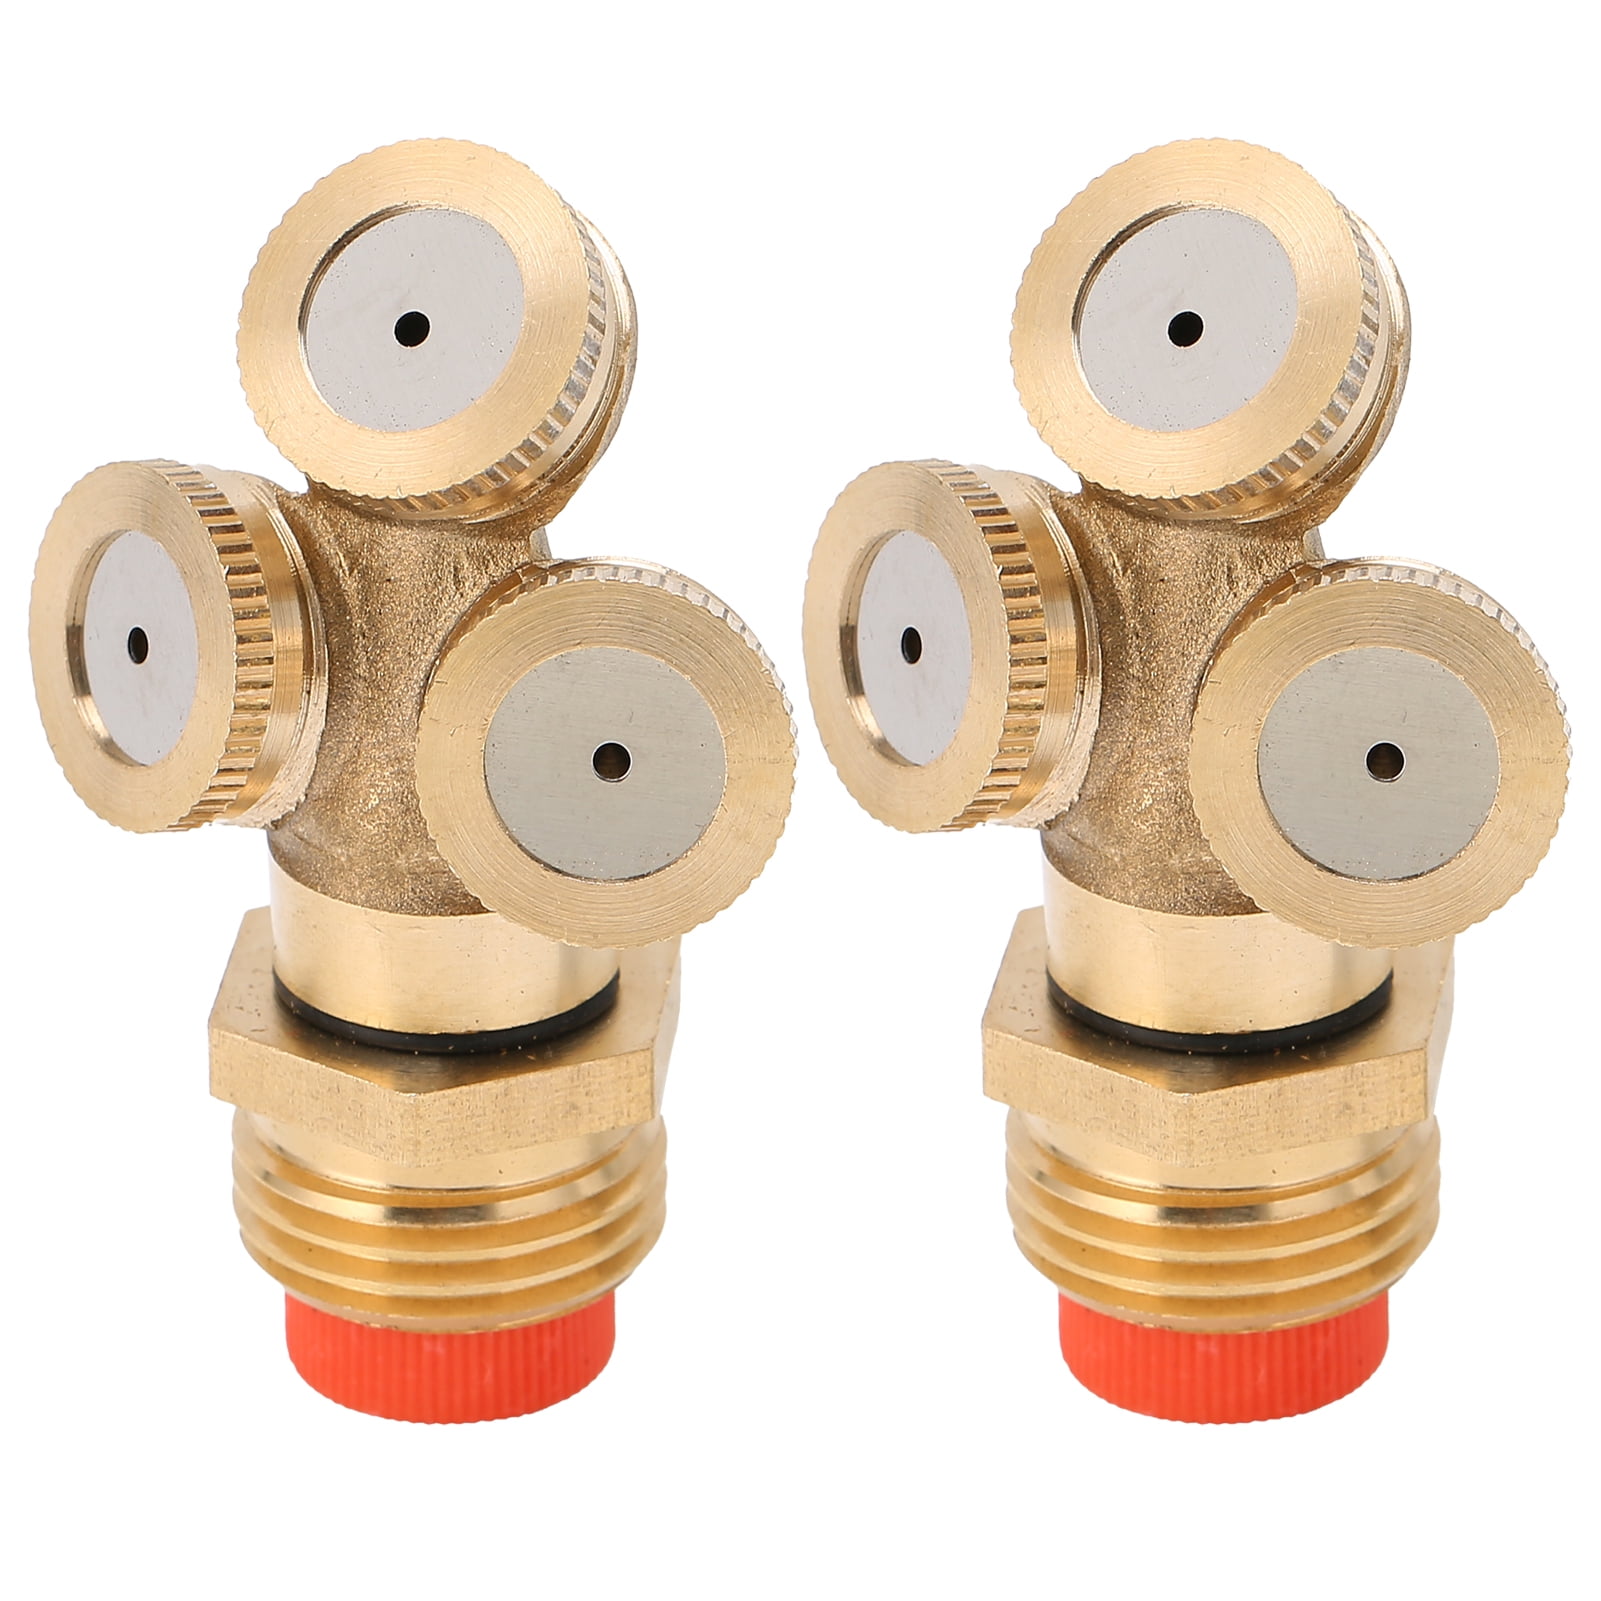 Brass Spray Nozzle Misting Garden Sprinklers Fitting 4 Hole Hose Water Connector 